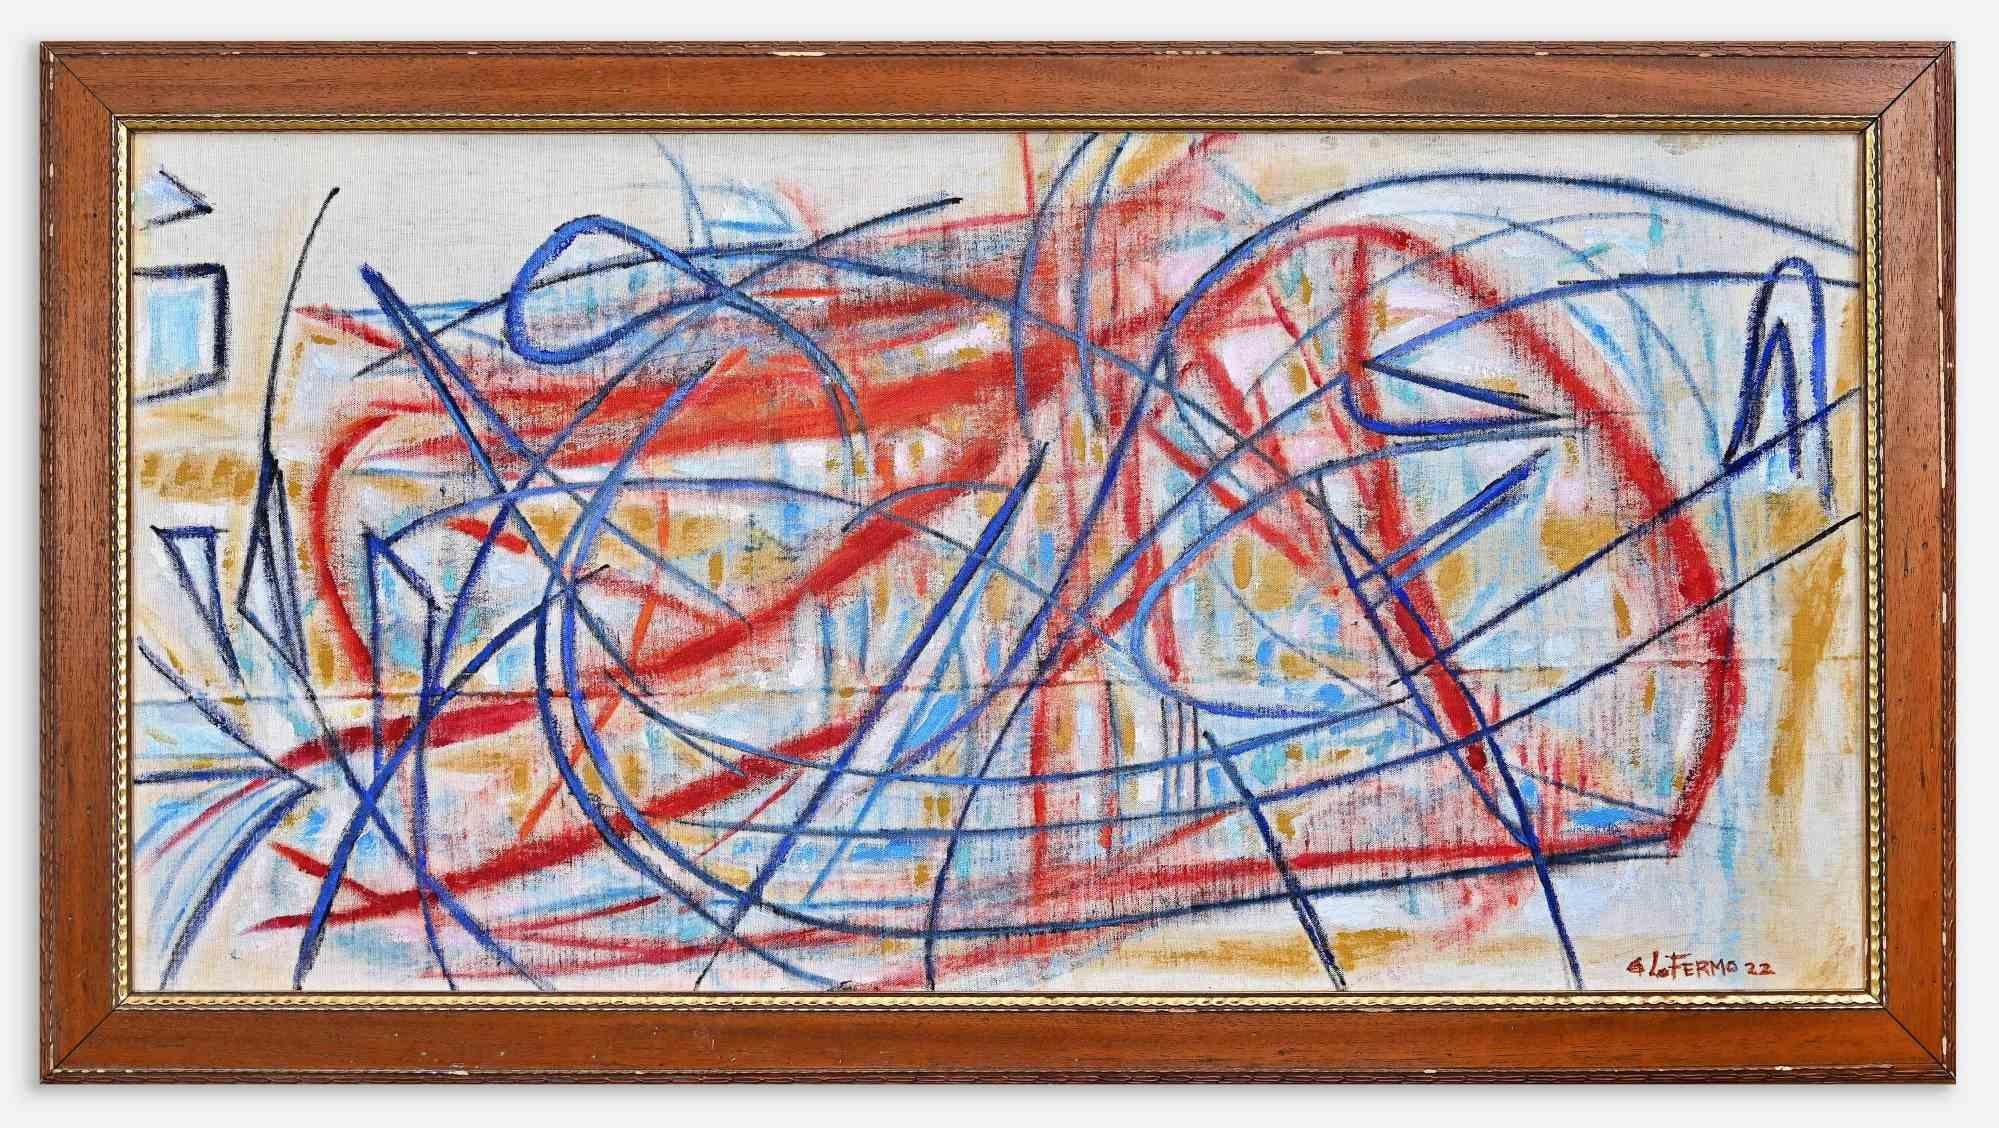 Abstract Expression is an artwork realized by Giorgio Lo Fermo (b. 1947) in 2022

Original Oil Painting on Canvas.

Hand signed and dated on the lower left margin.

Hand signed, dated and titled on the back of the canvas.

Good conditions.

Giorgio